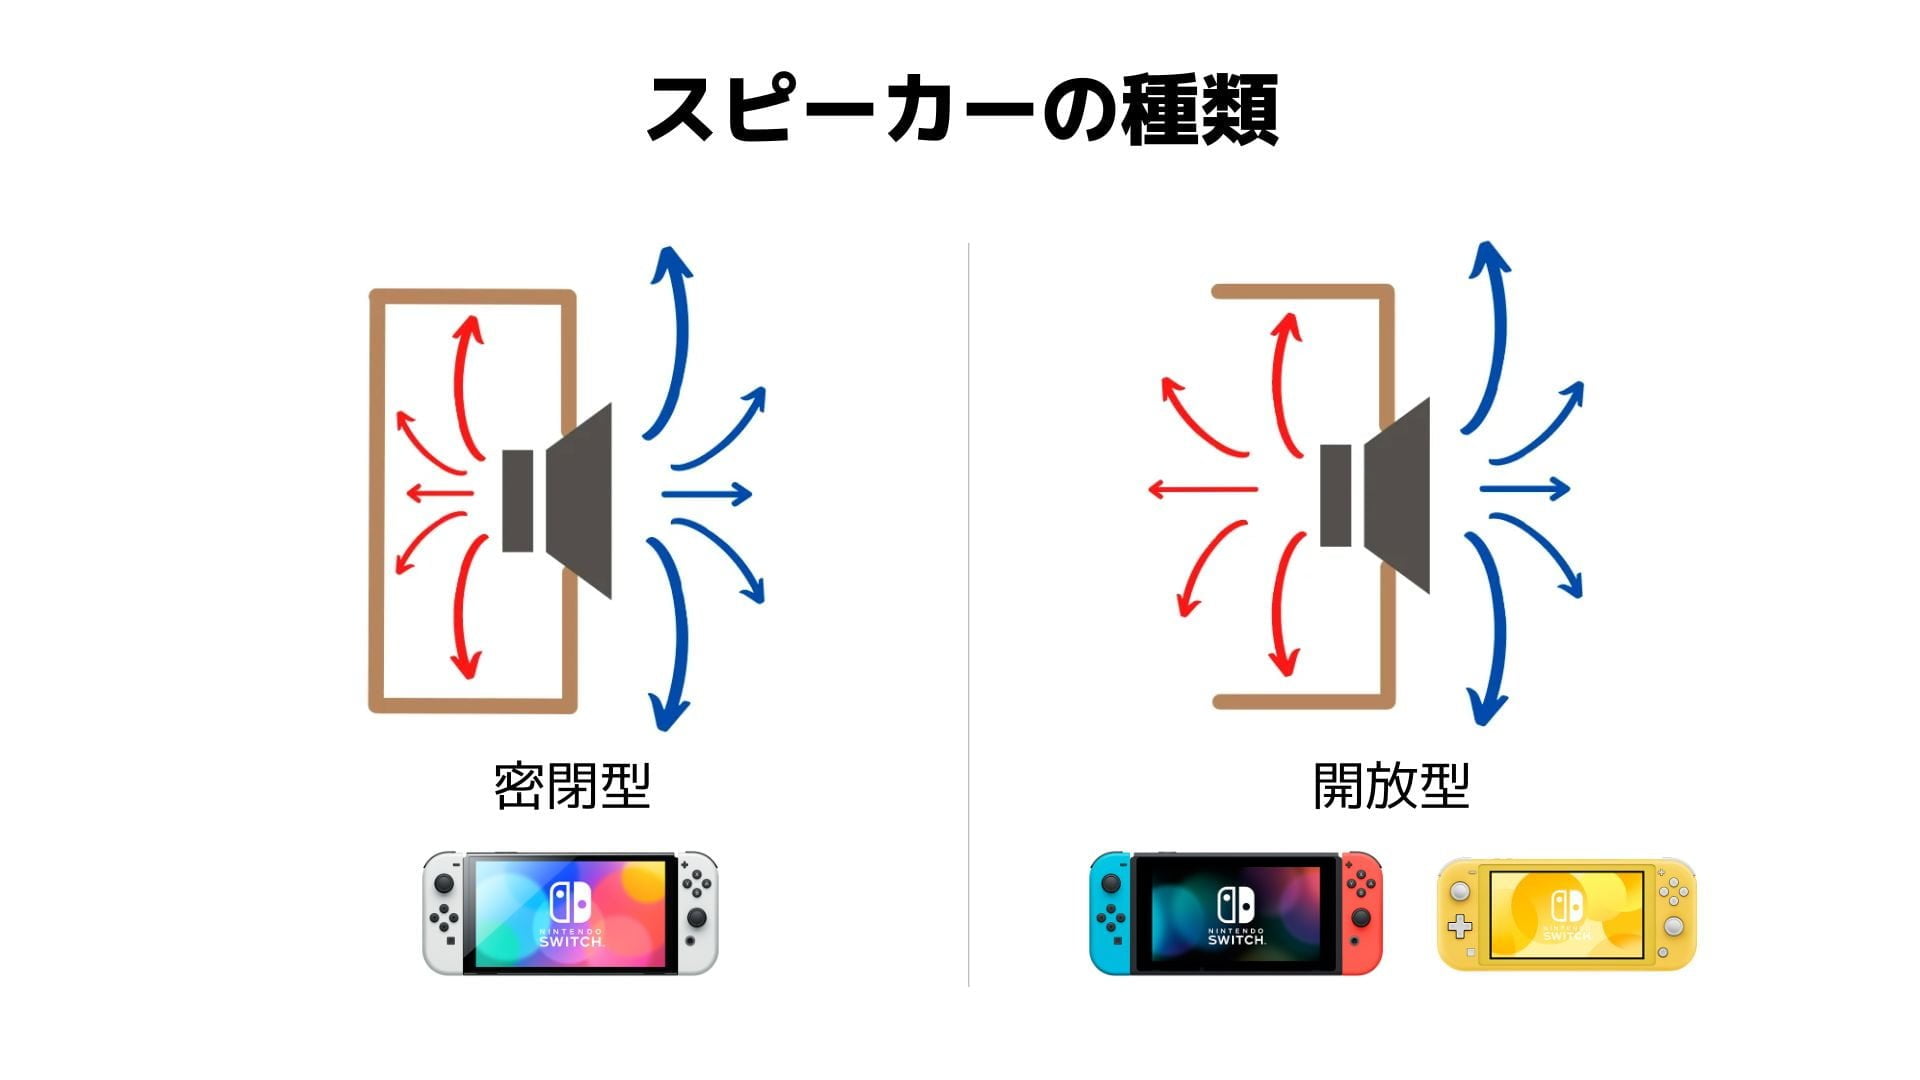 Switchのスピーカーの種類の比較画像